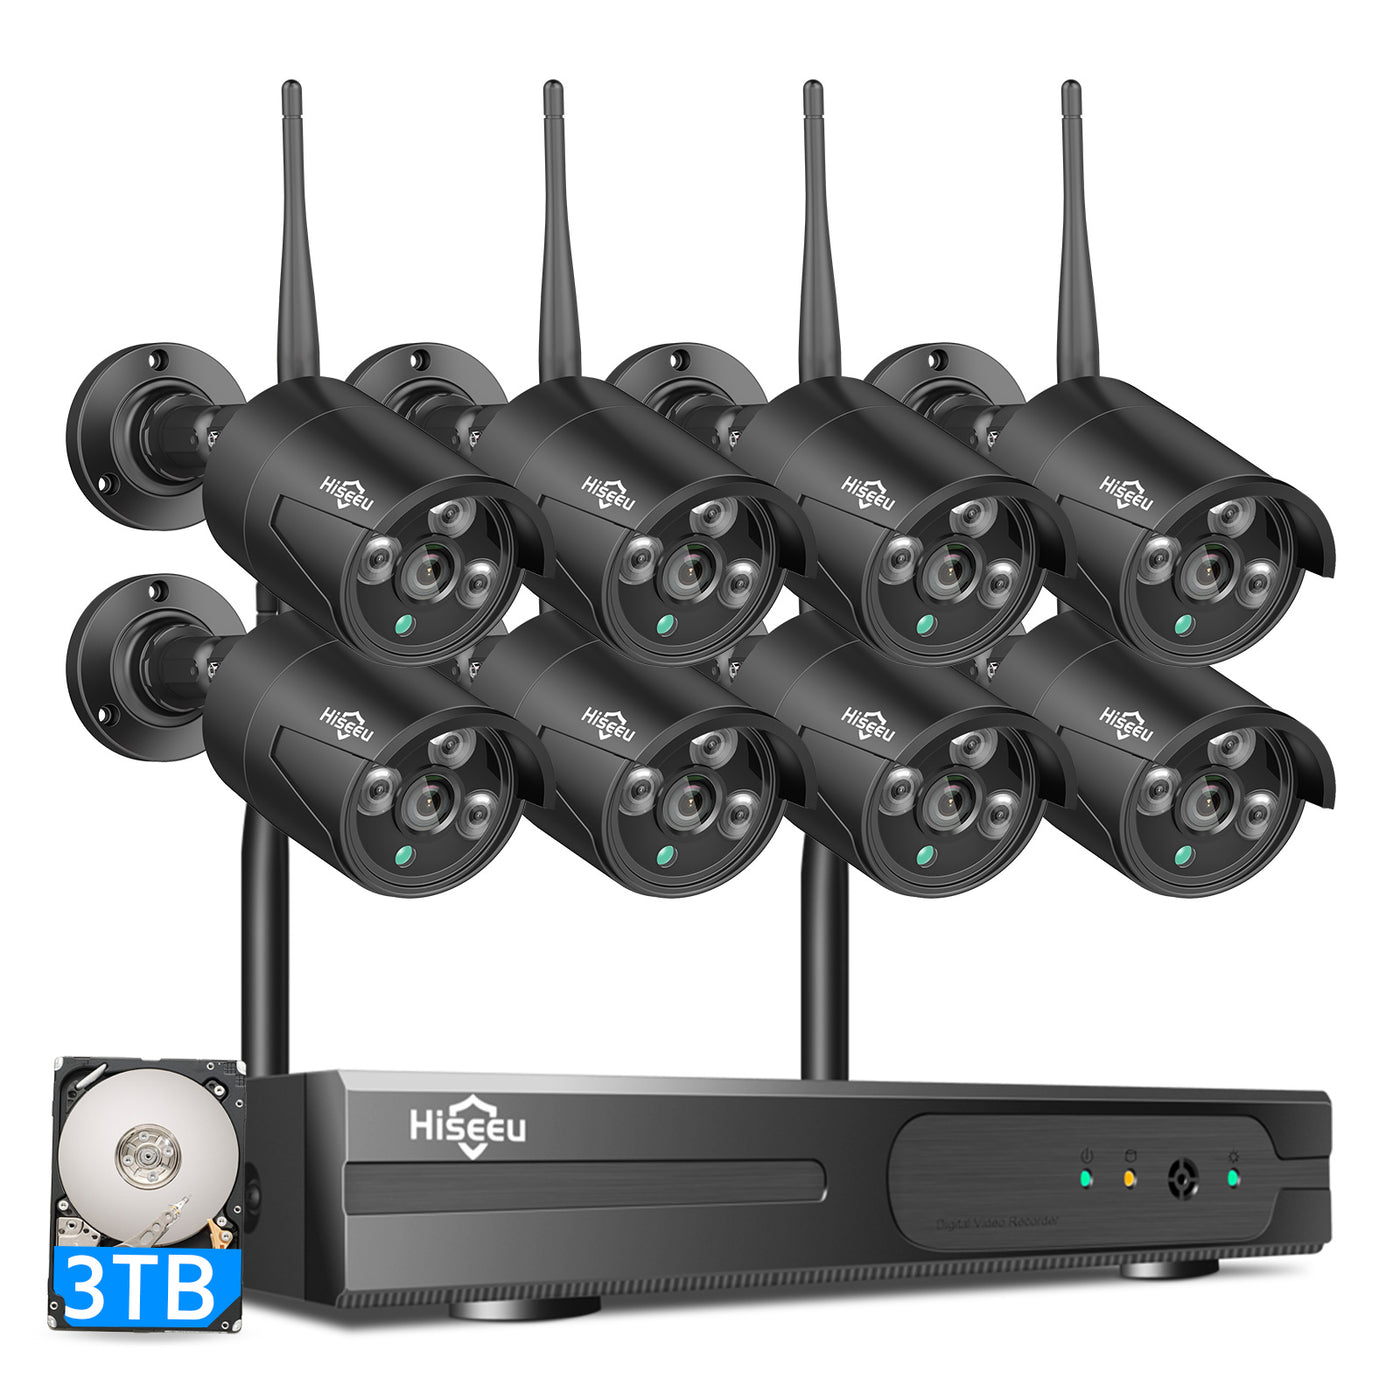 [Expandable 10CH,5MP]Wireless Black Security Camera System with 3TB Hard Drive with One-Way Audio,10 Channel NVR 8Pcs 5MP Night Vision WiFi Security Surveillance Cameras DC Power Home Outdoor